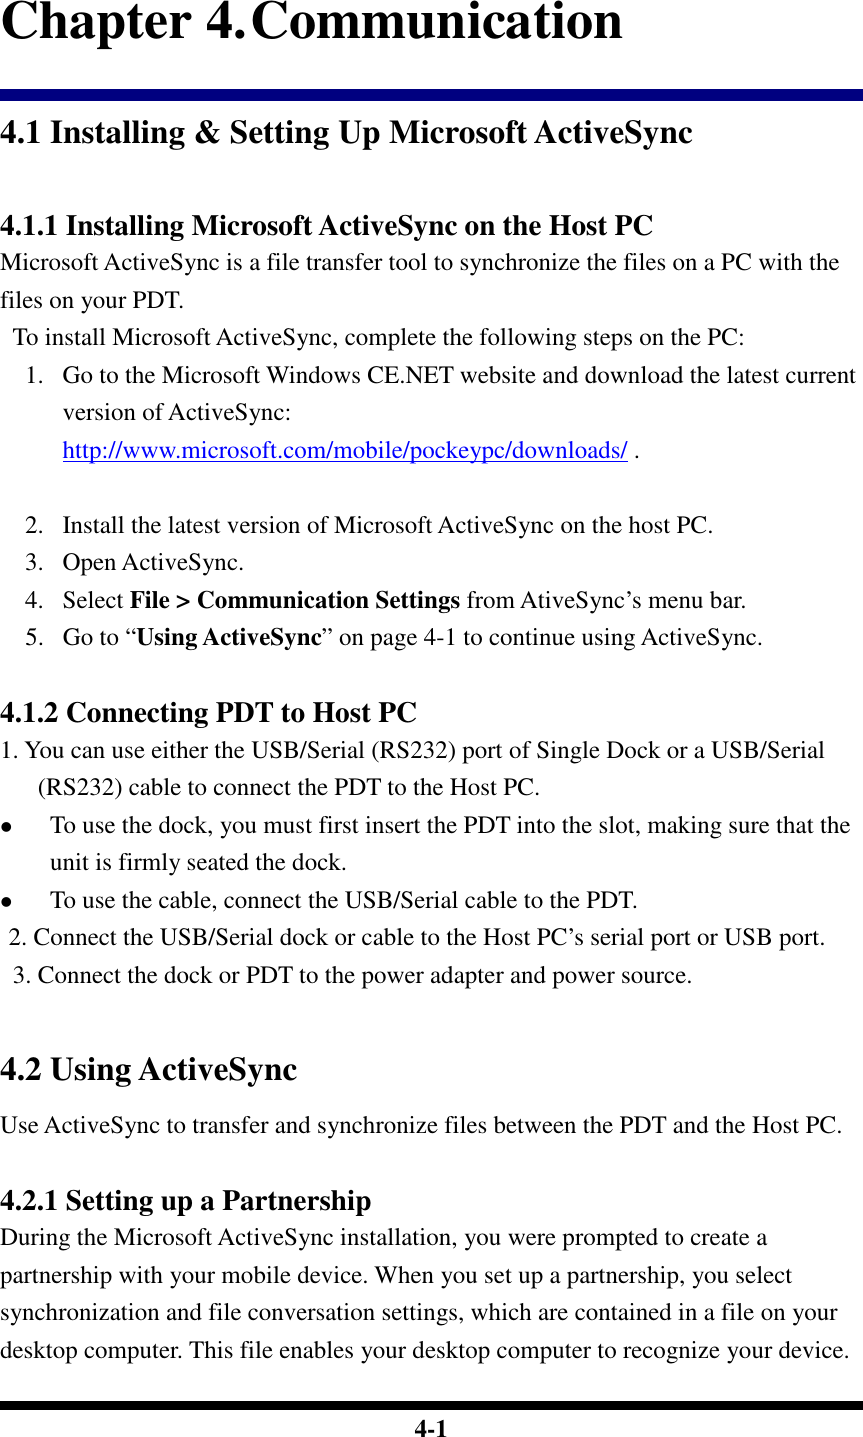  4-1 Chapter 4. Communication 4.1 Installing &amp; Setting Up Microsoft ActiveSync  4.1.1 Installing Microsoft ActiveSync on the Host PC Microsoft ActiveSync is a file transfer tool to synchronize the files on a PC with the files on your PDT.     To install Microsoft ActiveSync, complete the following steps on the PC: 1. Go to the Microsoft Windows CE.NET website and download the latest current version of ActiveSync: http://www.microsoft.com/mobile/pockeypc/downloads/ .     2. Install the latest version of Microsoft ActiveSync on the host PC. 3. Open ActiveSync. 4. Select File &gt; Communication Settings from AtiveSync’s menu bar. 5. Go to “Using ActiveSync” on page 4-1 to continue using ActiveSync.  4.1.2 Connecting PDT to Host PC 1. You can use either the USB/Serial (RS232) port of Single Dock or a USB/Serial (RS232) cable to connect the PDT to the Host PC.  To use the dock, you must first insert the PDT into the slot, making sure that the unit is firmly seated the dock.  To use the cable, connect the USB/Serial cable to the PDT.  2. Connect the USB/Serial dock or cable to the Host PC’s serial port or USB port.   3. Connect the dock or PDT to the power adapter and power source.    4.2 Using ActiveSync Use ActiveSync to transfer and synchronize files between the PDT and the Host PC.  4.2.1 Setting up a Partnership During the Microsoft ActiveSync installation, you were prompted to create a partnership with your mobile device. When you set up a partnership, you select synchronization and file conversation settings, which are contained in a file on your desktop computer. This file enables your desktop computer to recognize your device. 